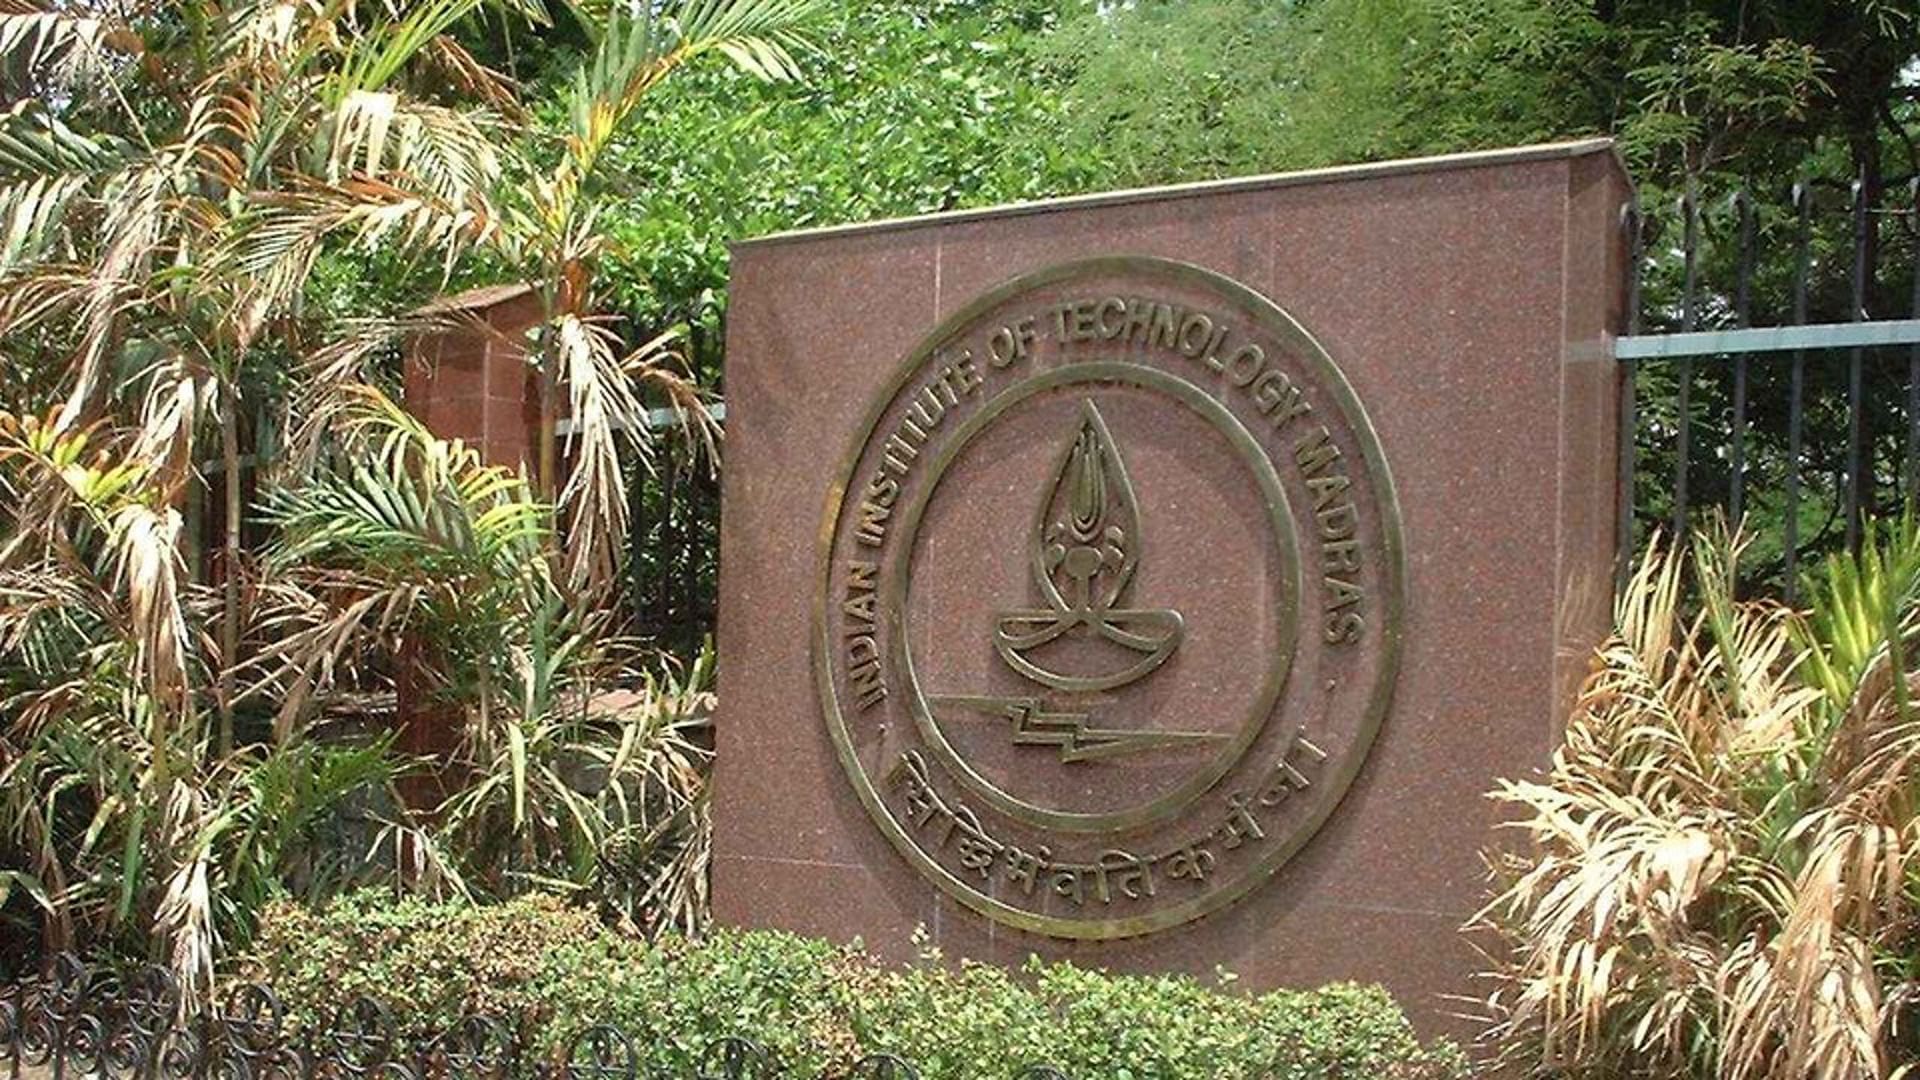  The institute opened its doors for final-year students on December 7 as per an order from the government of Tamil Nadu.